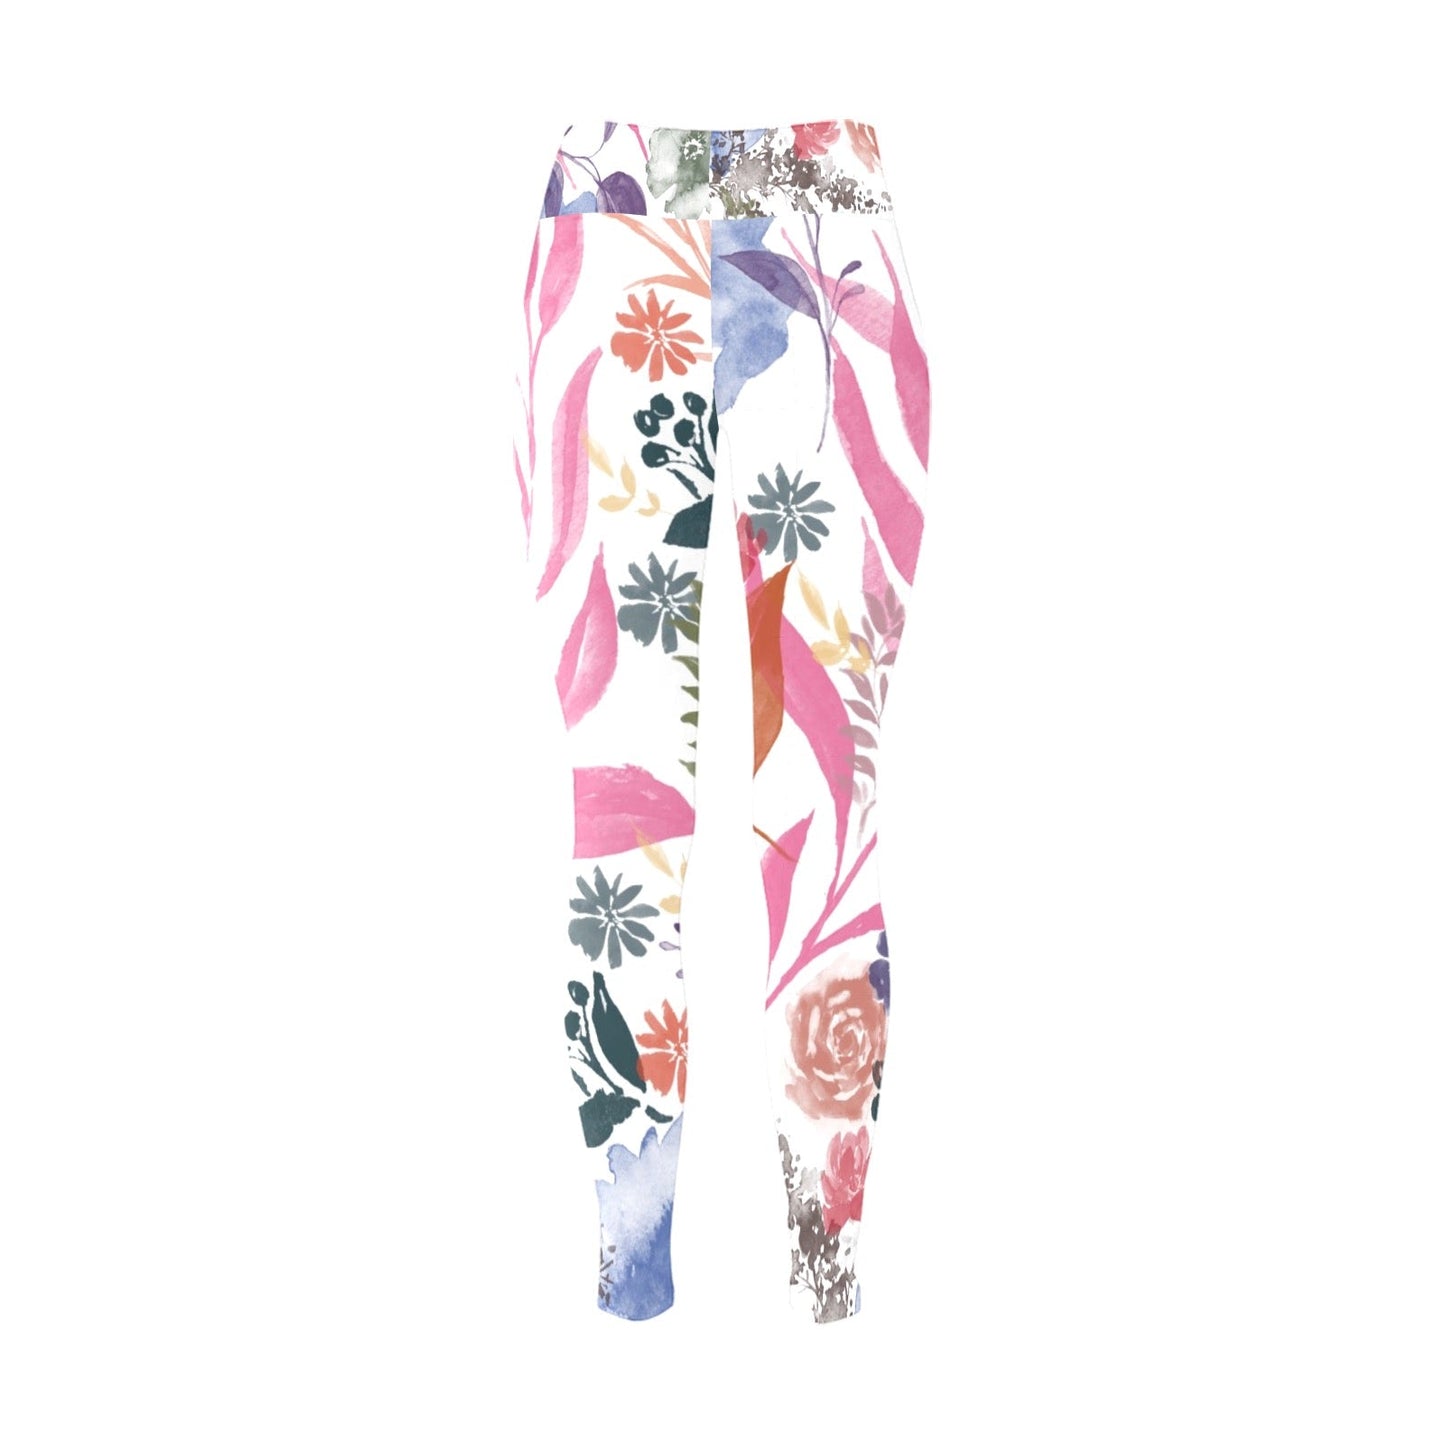 Multicolor Flowers Workout Leggings. Houston Collection. Design hand-painted by the Designer Maria Alejandra Echenique